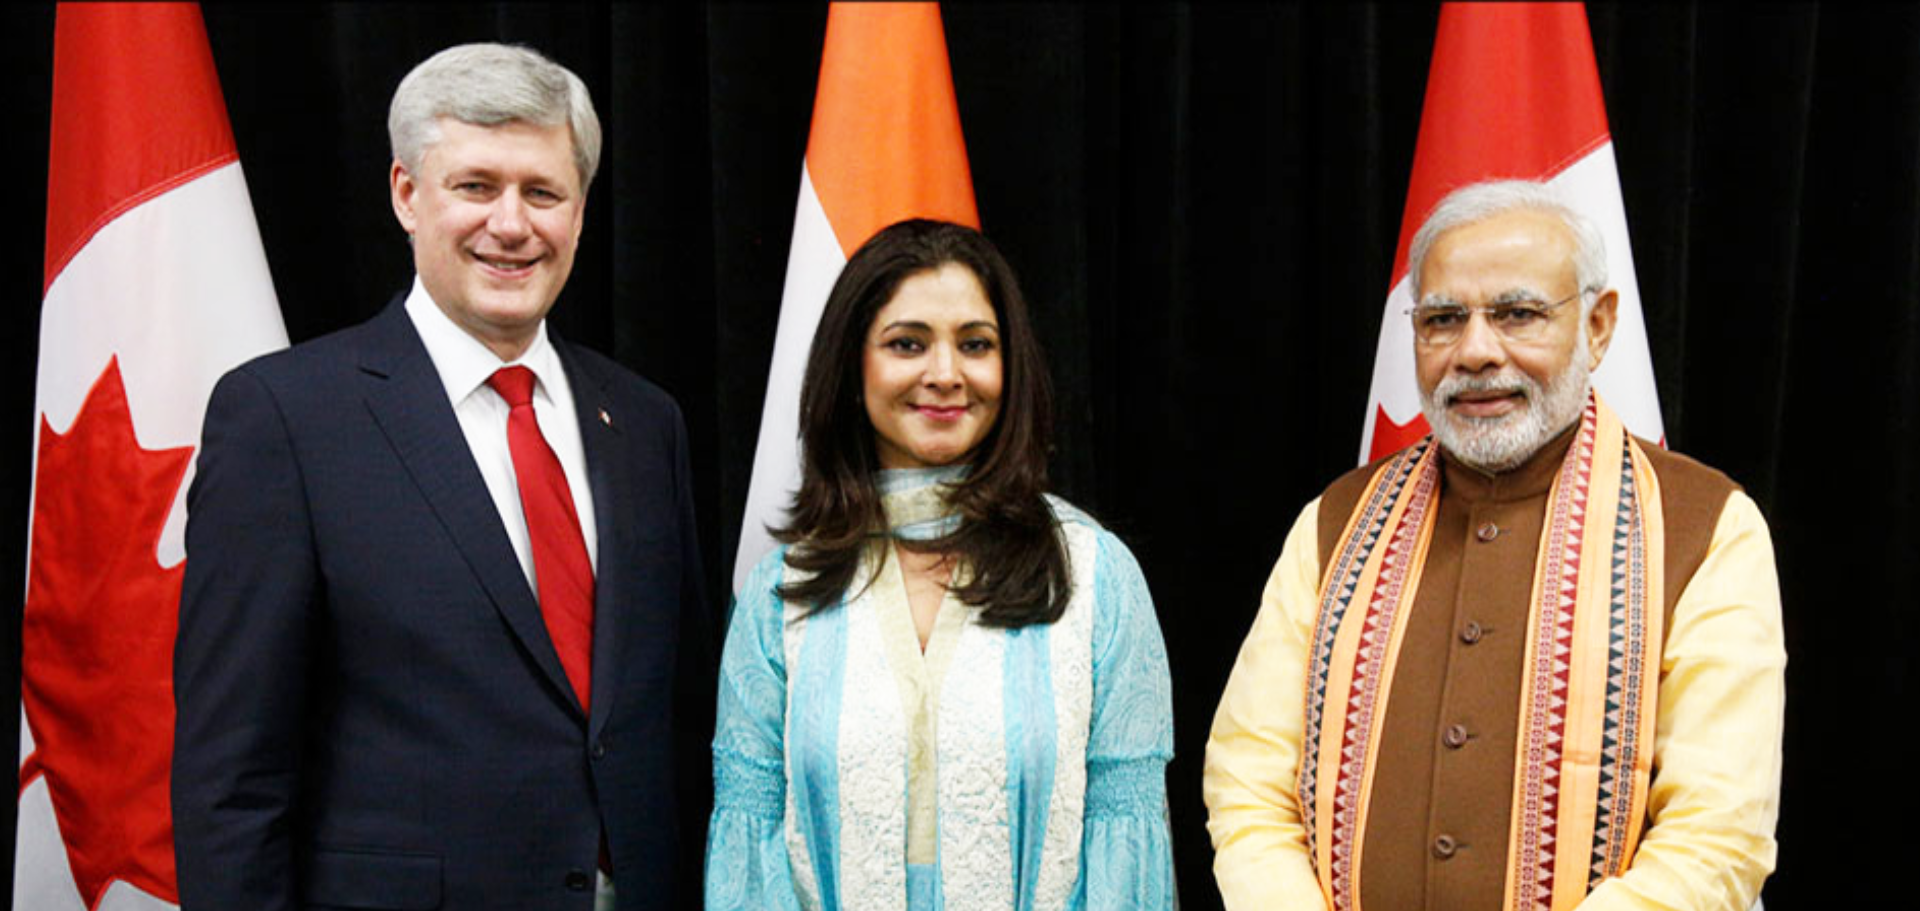 Meeting with PM Modi and Former PM Canada